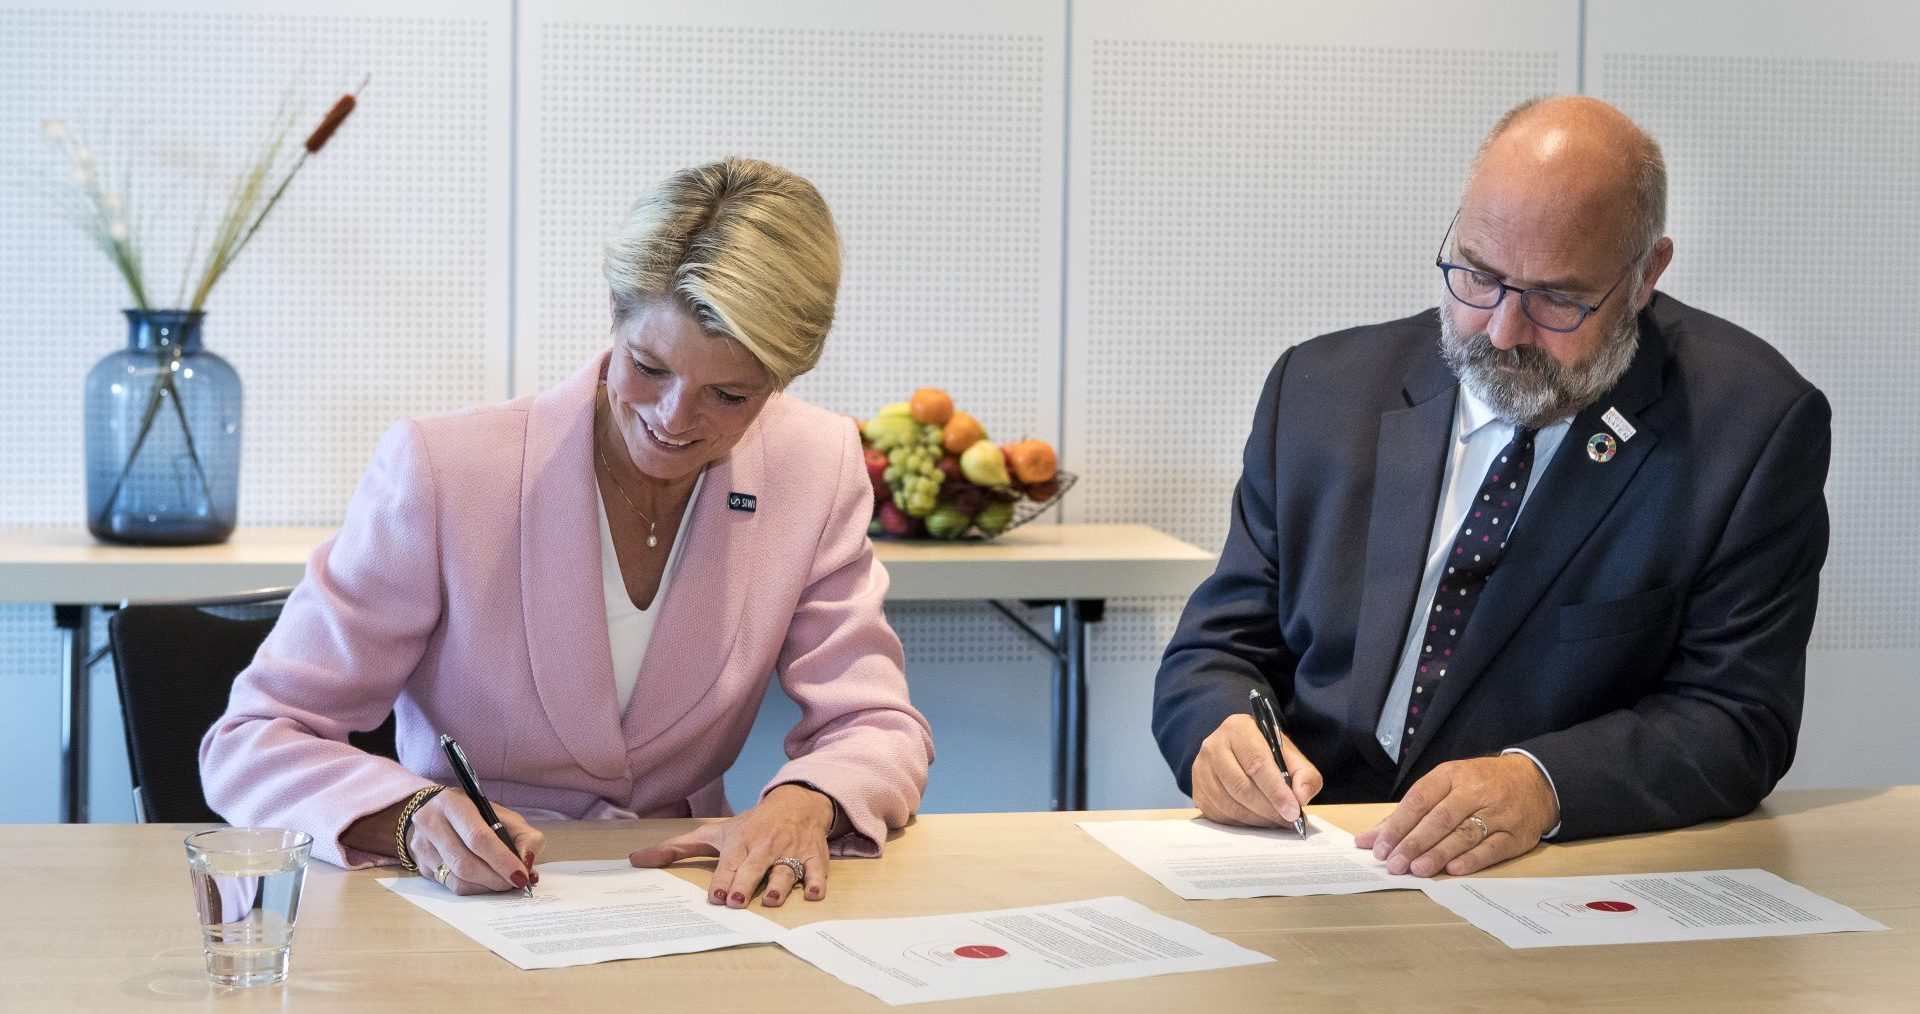 Karin Gardes, Acting SIWI Executive Director (L) and Dr. Mark Fletcher, Global Water Leader for Arup signing the agreement.